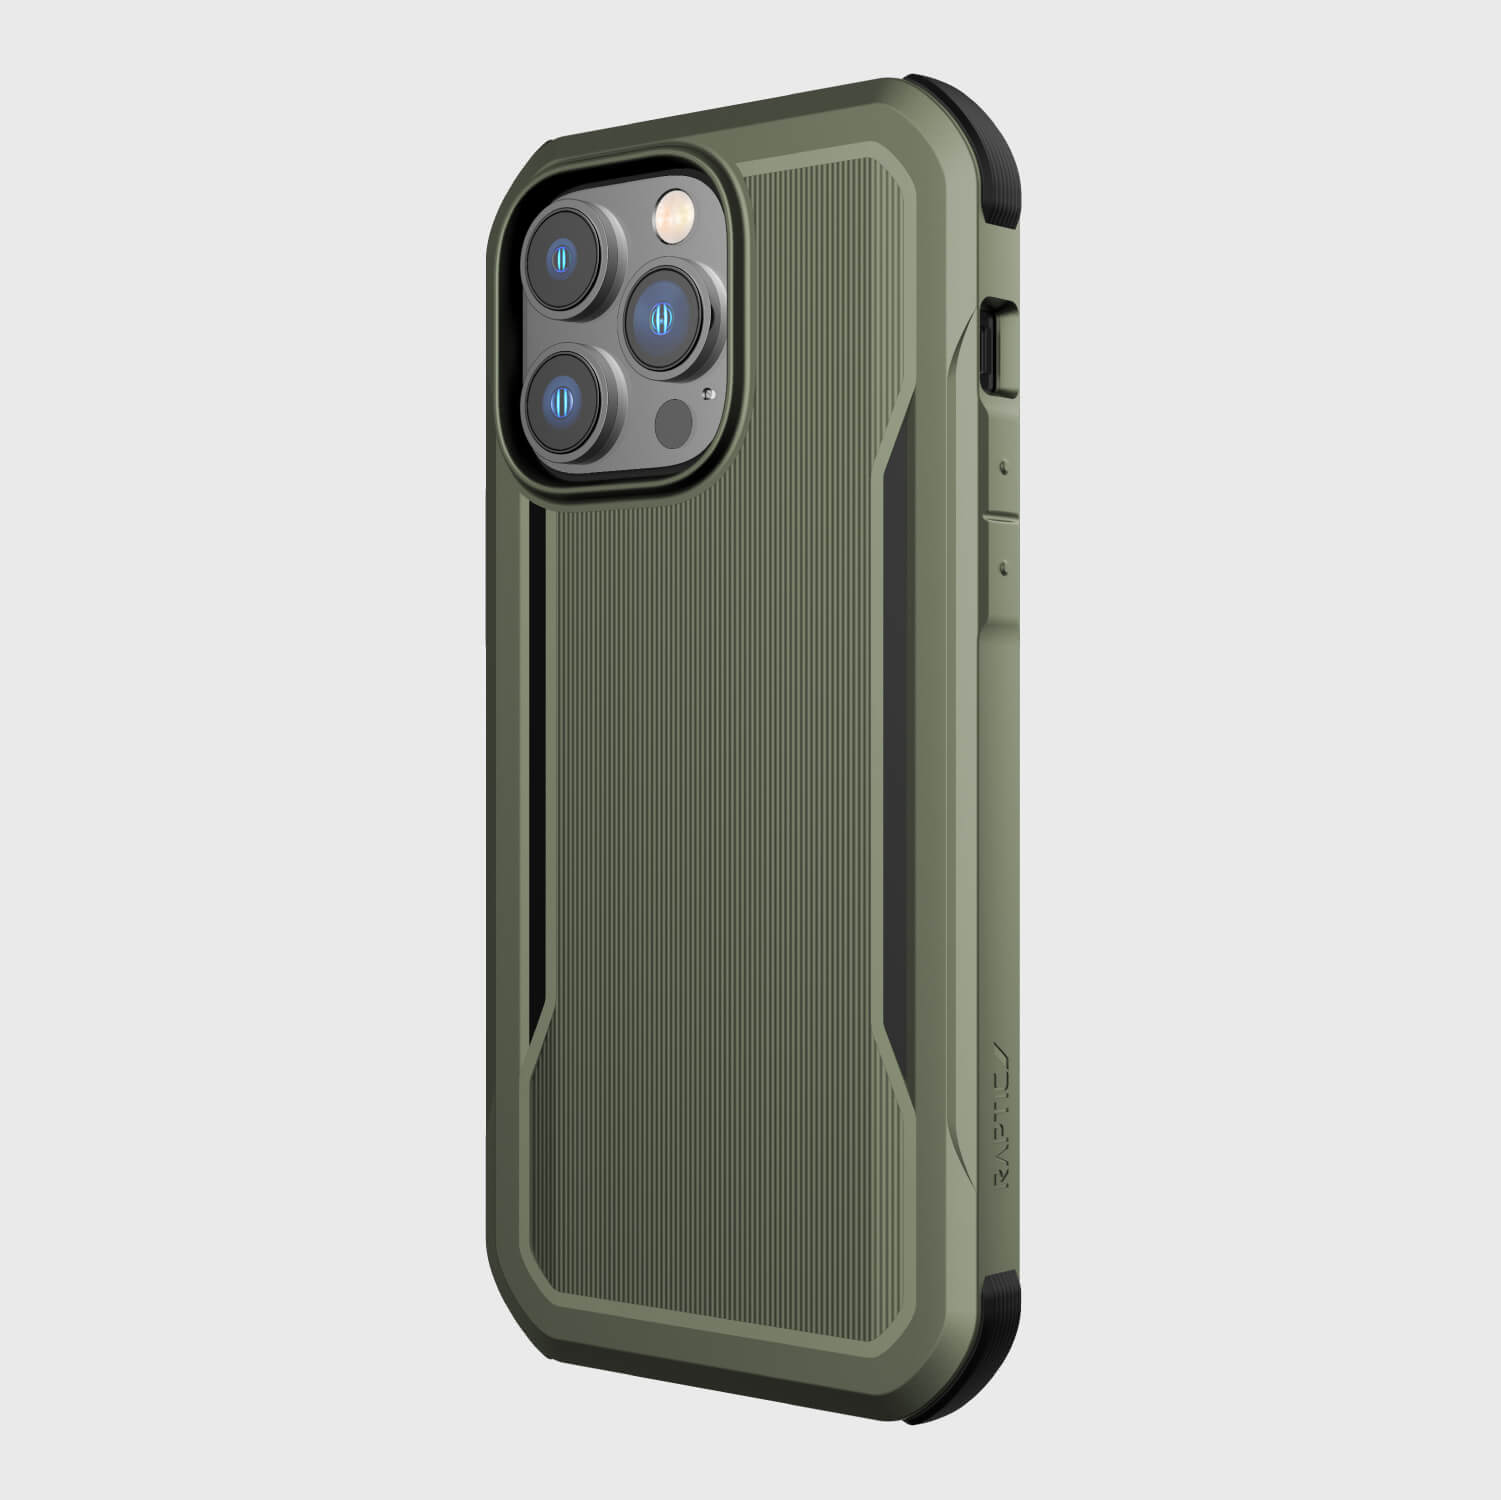 The Raptic iPhone 14/15 Pro Max Case - Fort Built for MagSafe in olive green offers military-grade drop protection.